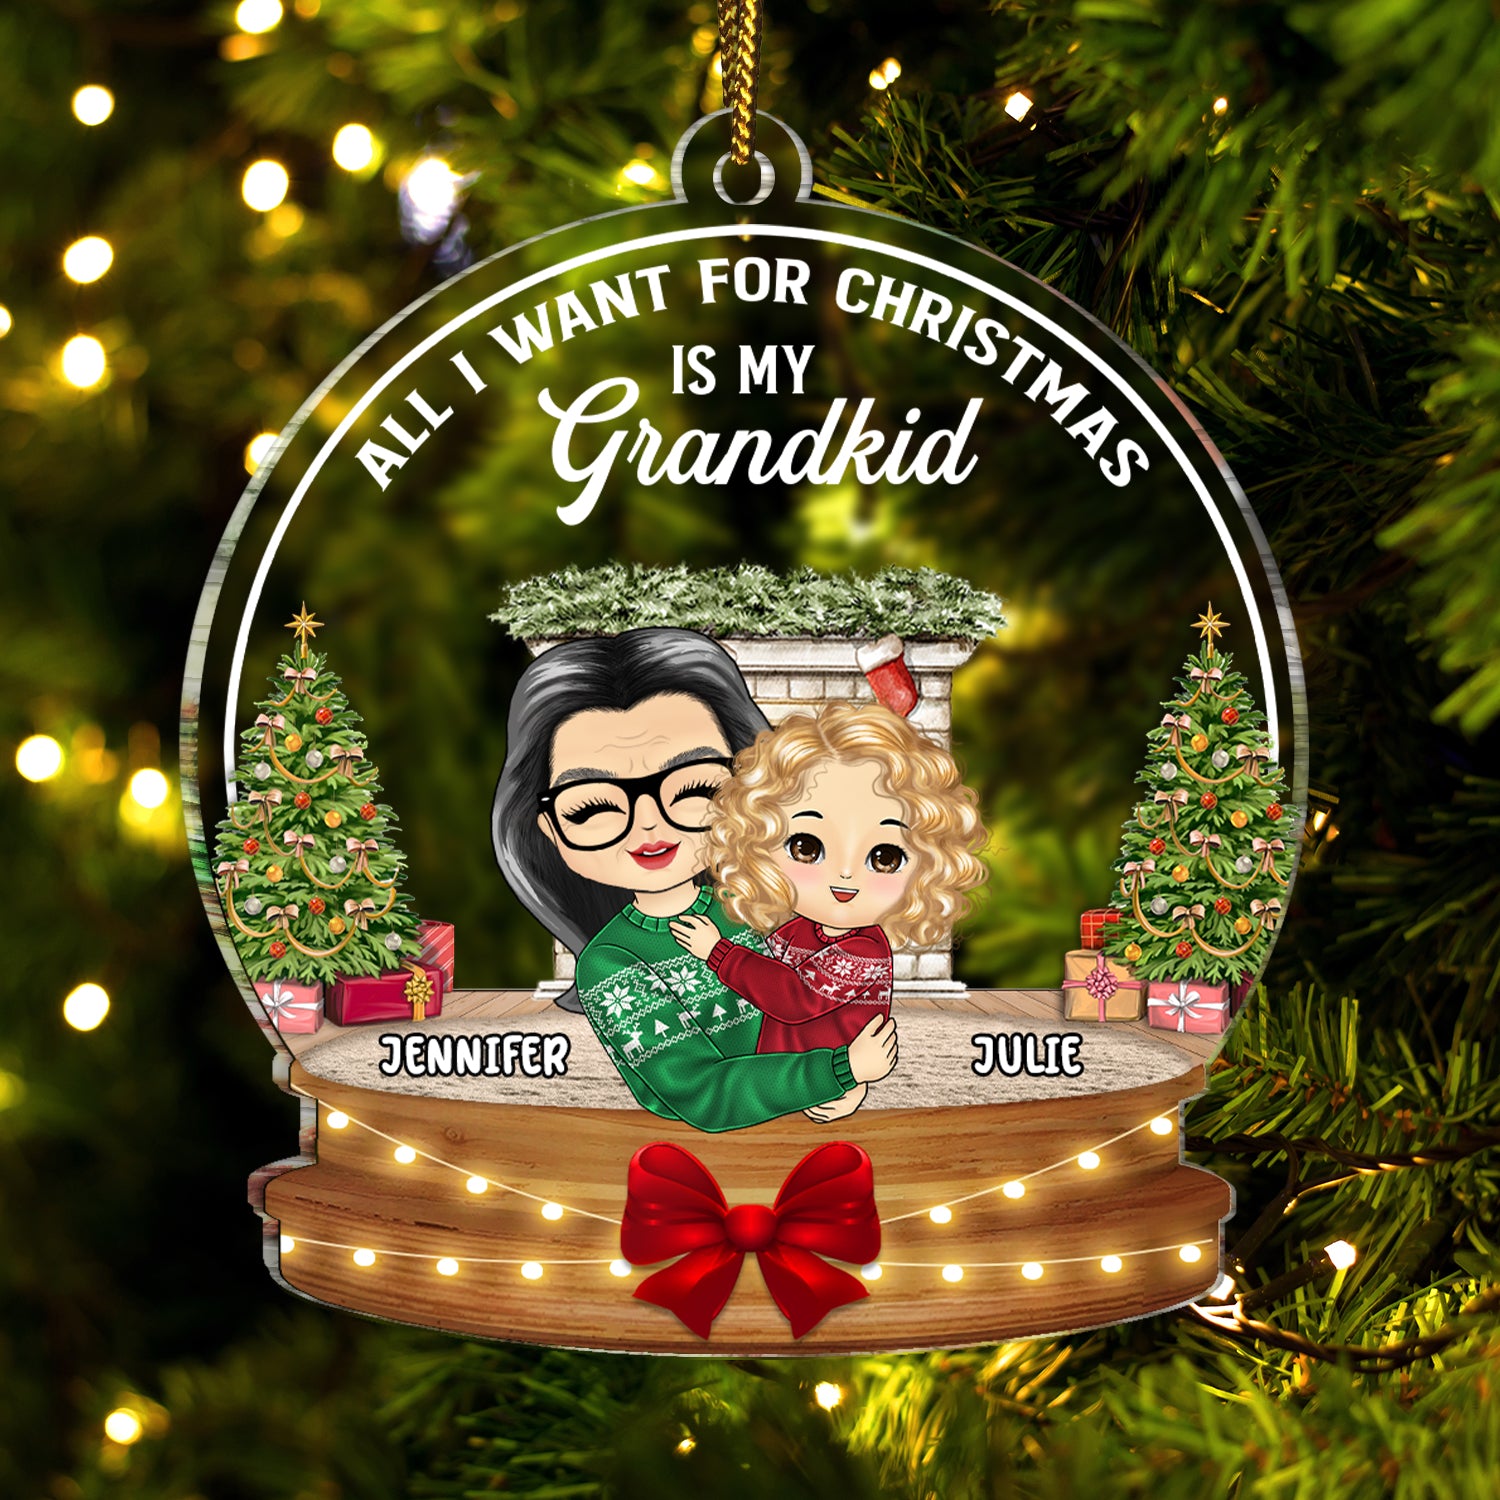 All I Want For Christmas Is My Grandkid - Christmas Gift For Grandma - Personalized Custom Shaped Acrylic Ornament